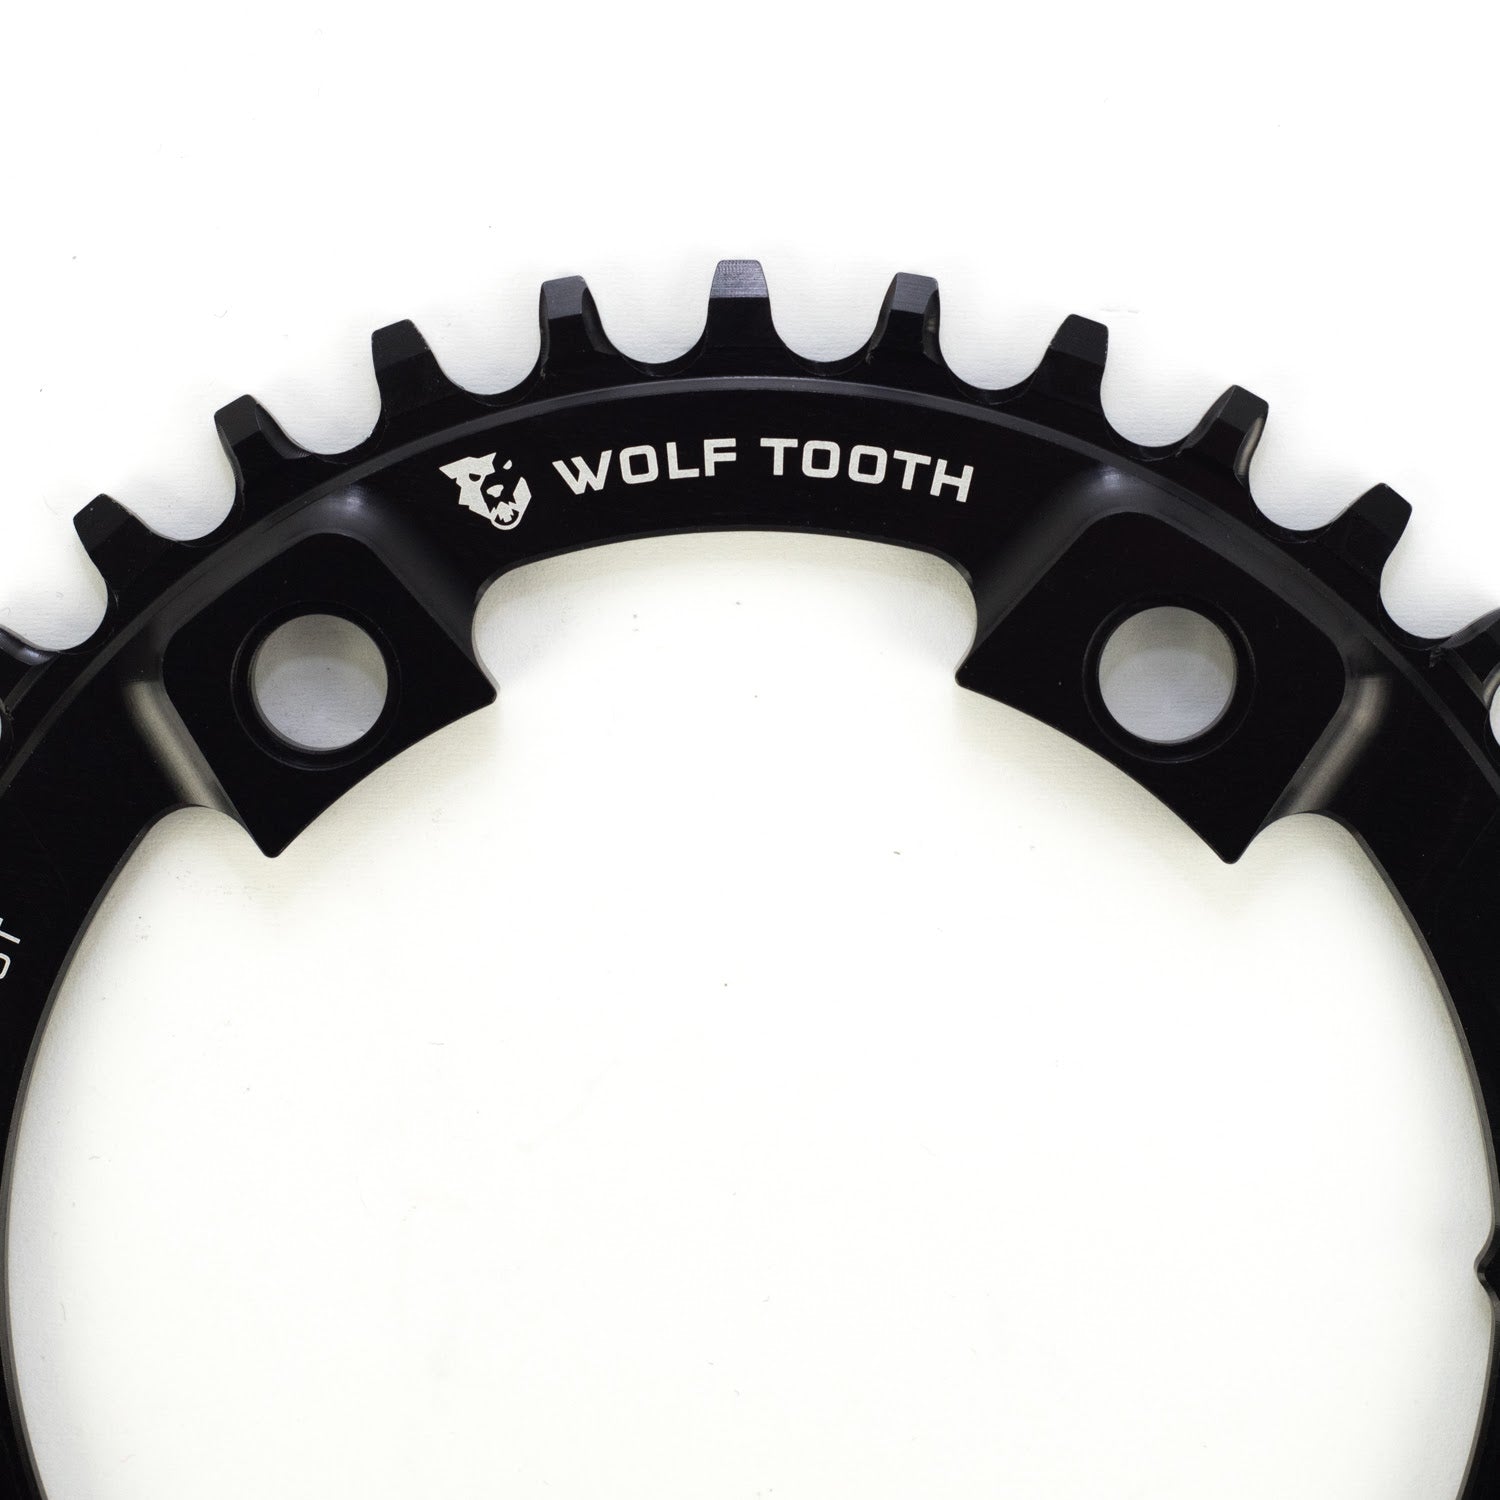 WOLF TOOTH Drop Stop Chainring Shimano 4arm CX